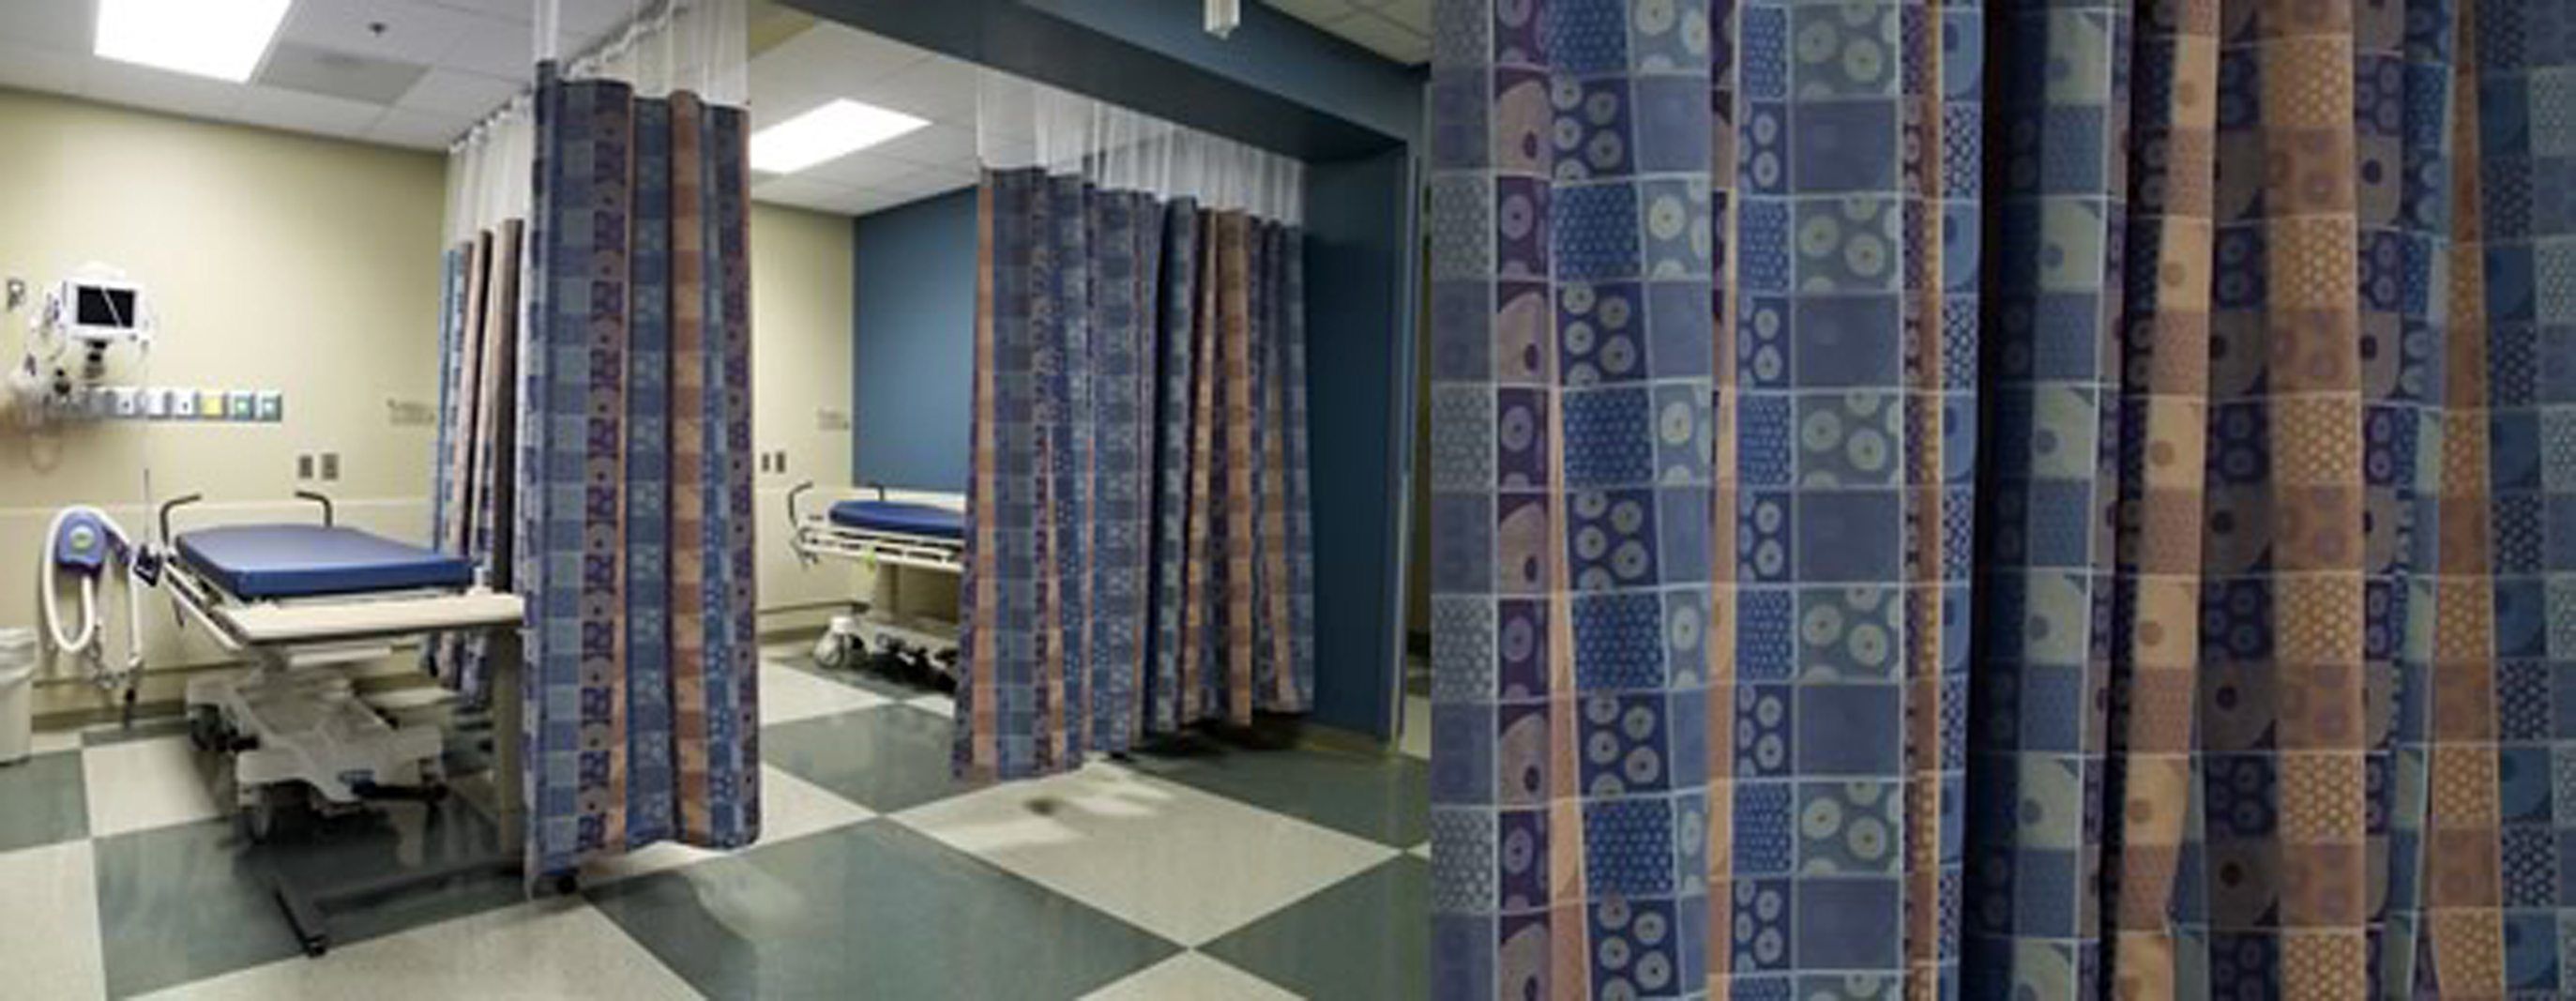 Rate of contamination of hospital privacy curtains in a burns/plastic ward: A longitudinal study